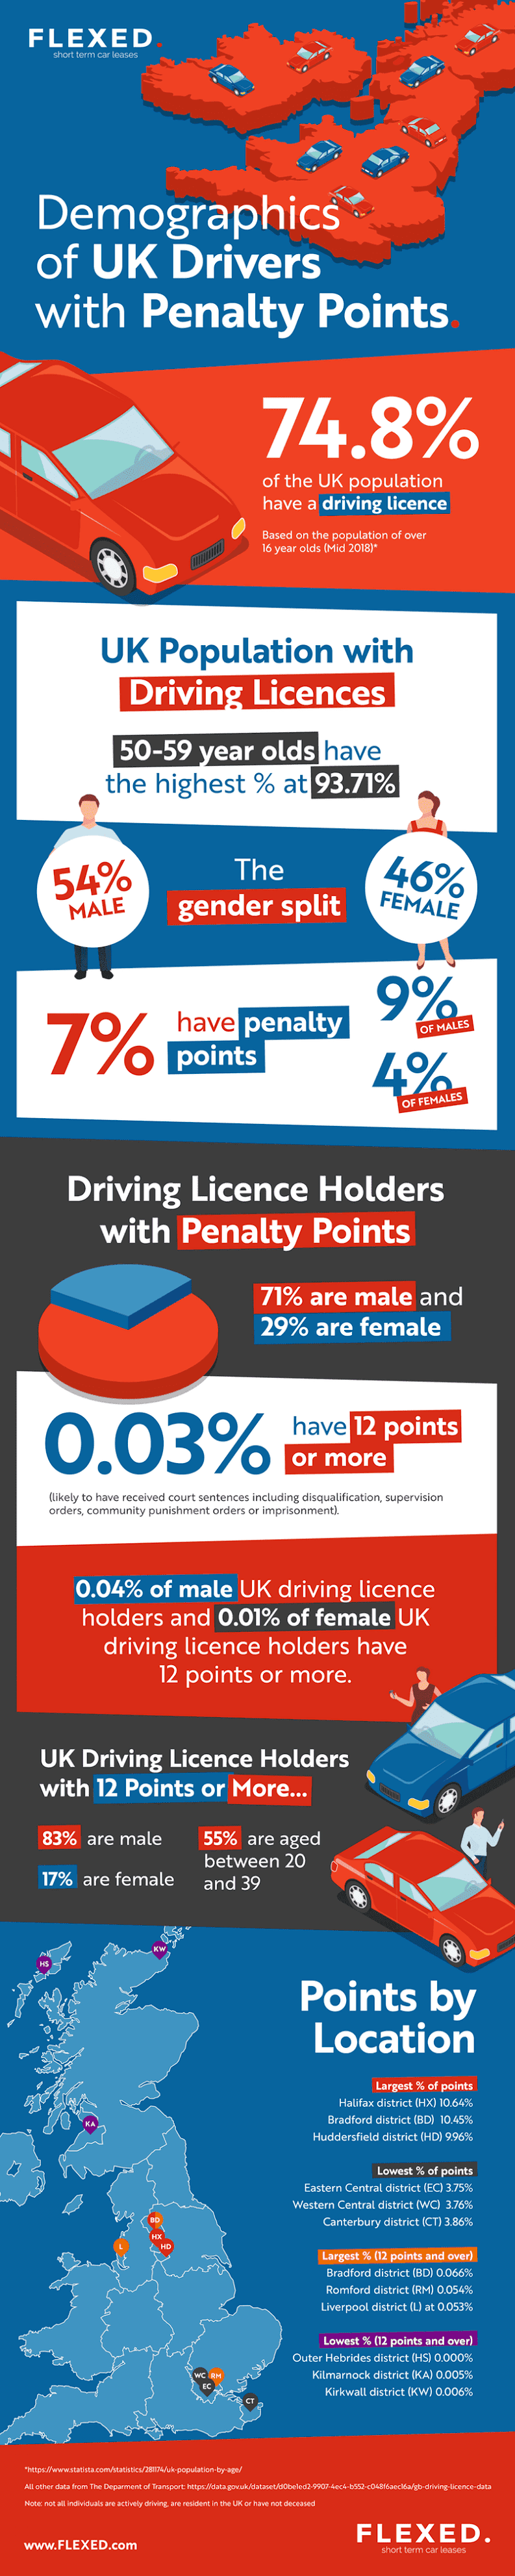 Driver penalty points: Who is most likely to have them? #infographic